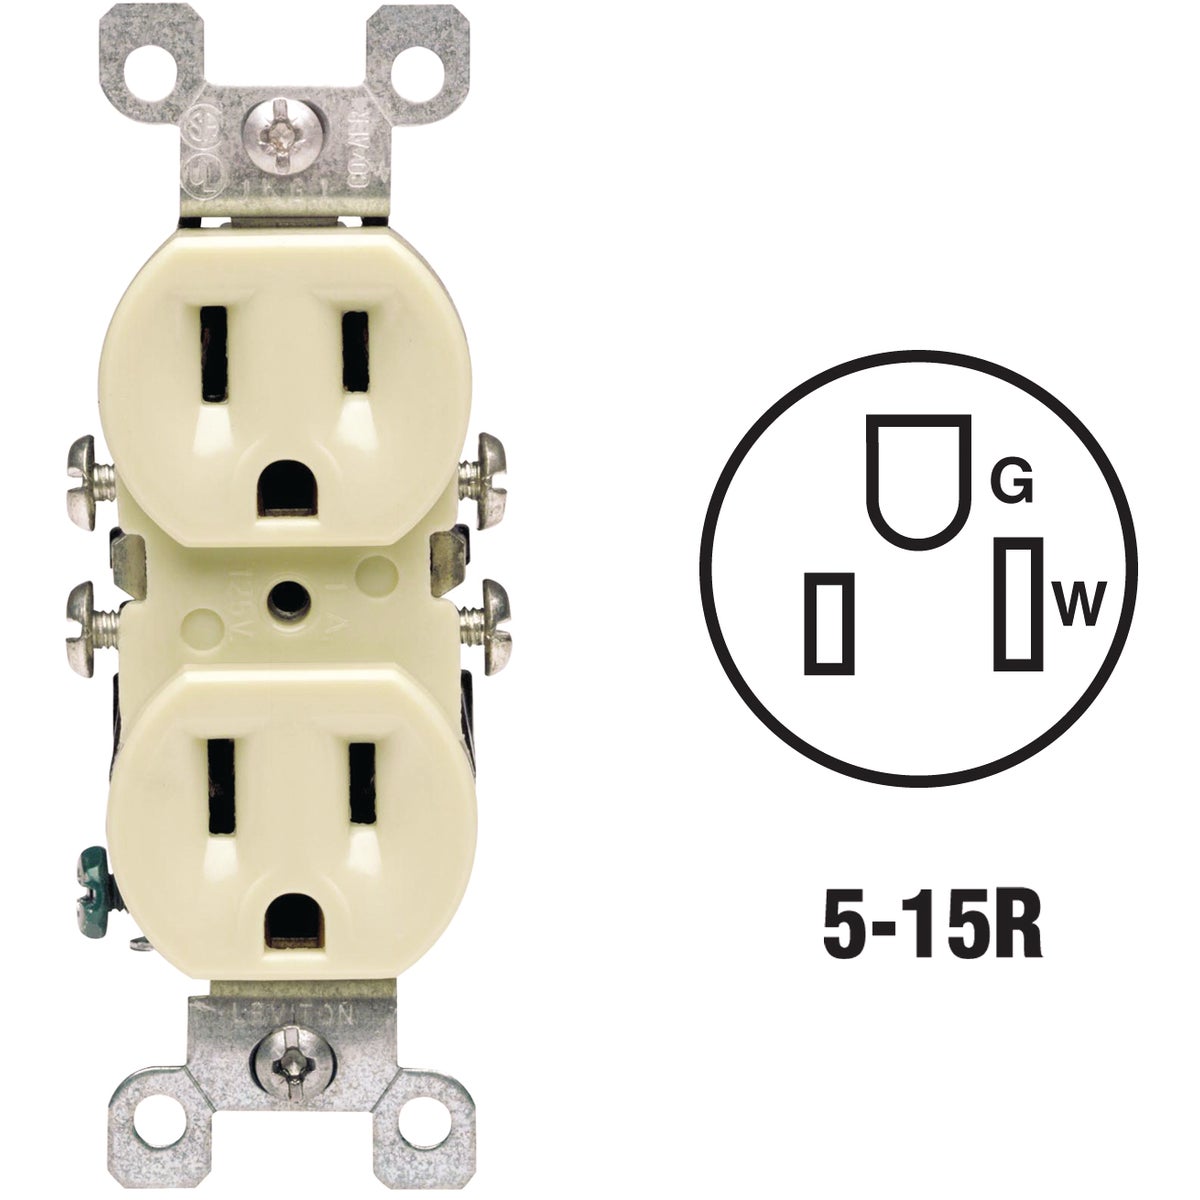 Item 507455, Duplex outlet for direct connection to No. 12 or No.